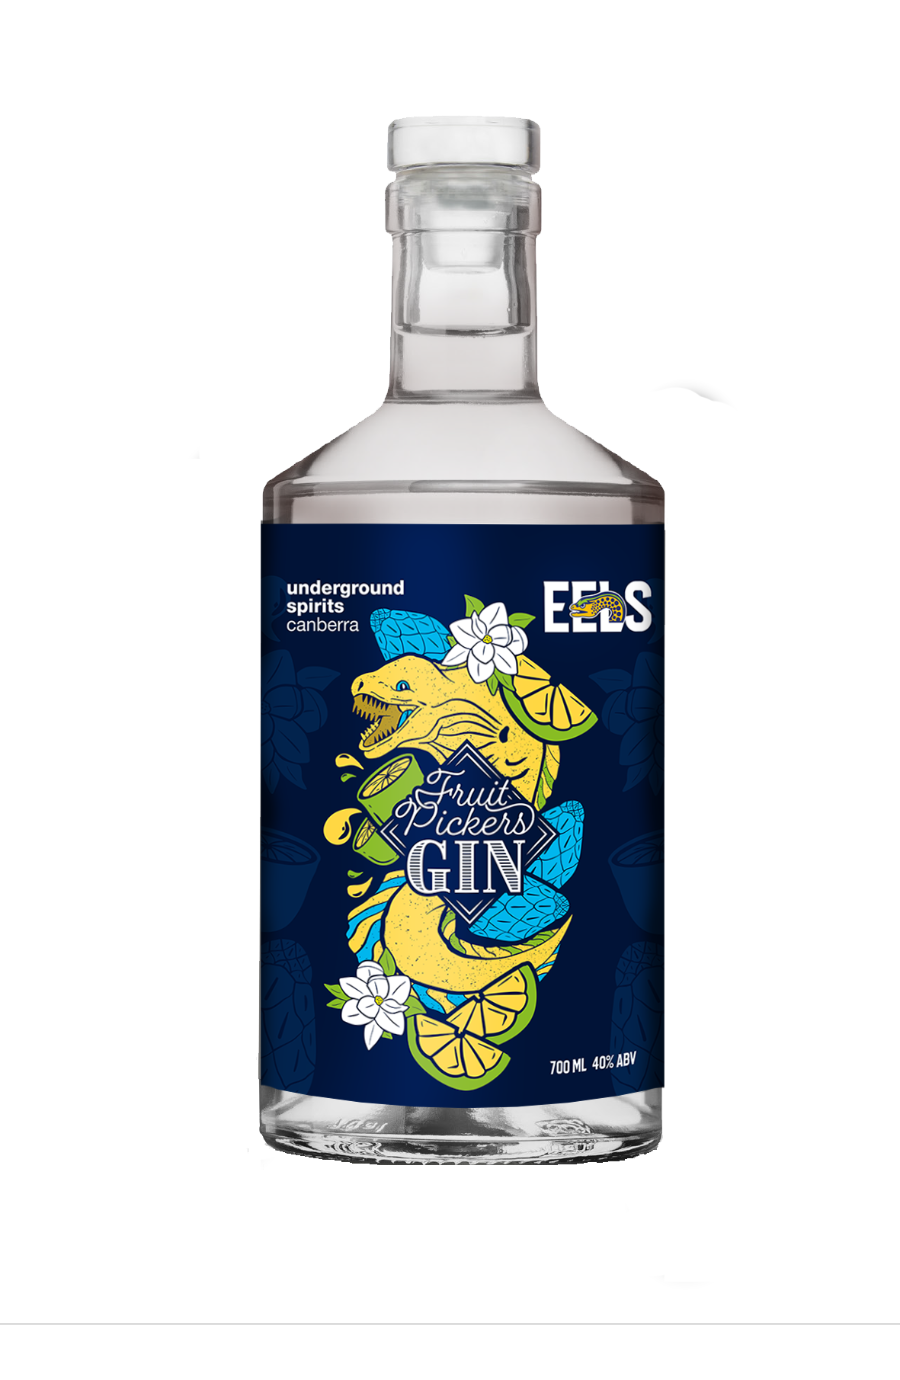 Image of a vibrant blue and yellow bottle, reflecting the Eels team colors, containing premium gin. The design features an artistic depiction of an eel intertwined with various fruits such as figs and limes, symbolizing the rich history and flavors of Parramatta. This unique bottle captures the essence of the Eels' journey and the spirit of the local community, making it a standout addition to any celebration or collection.